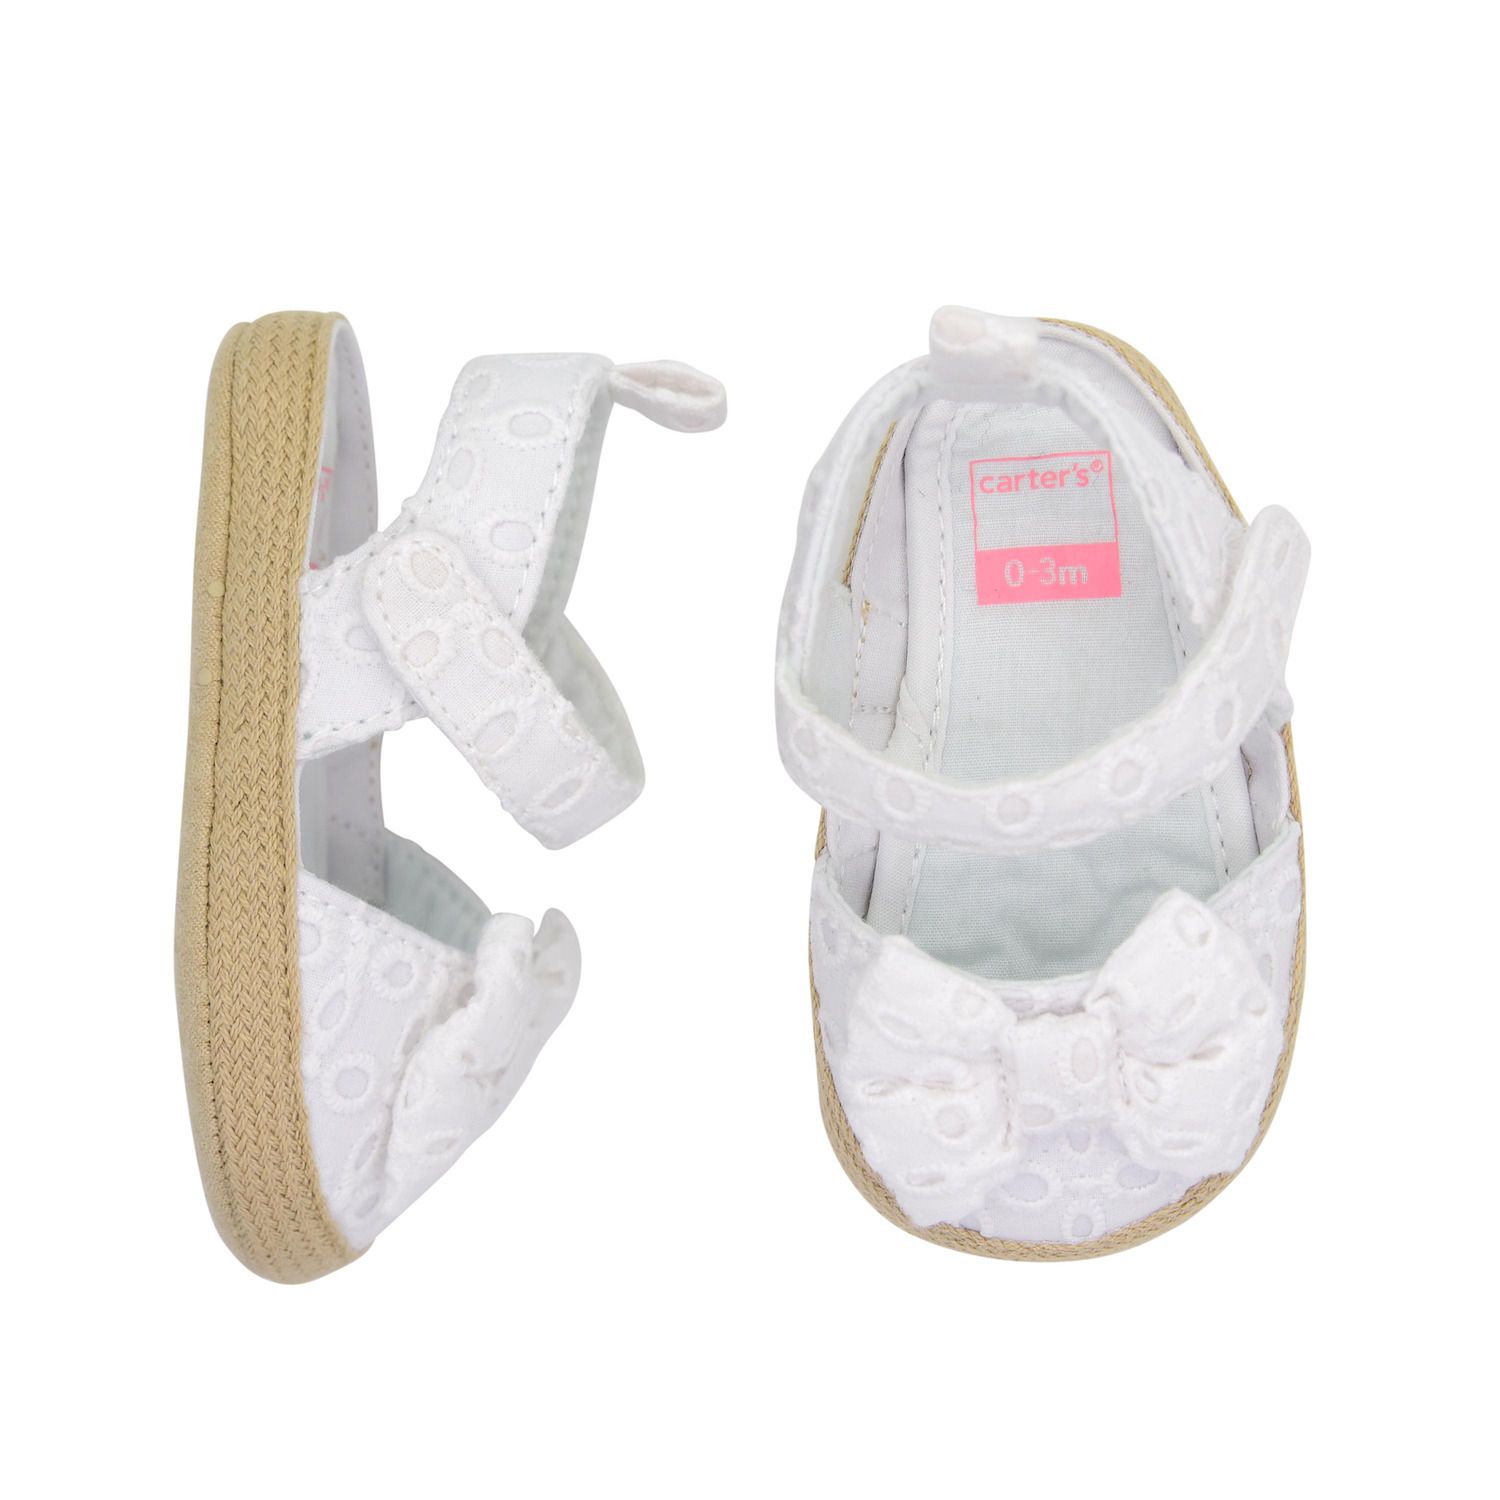 carters baby girl boots